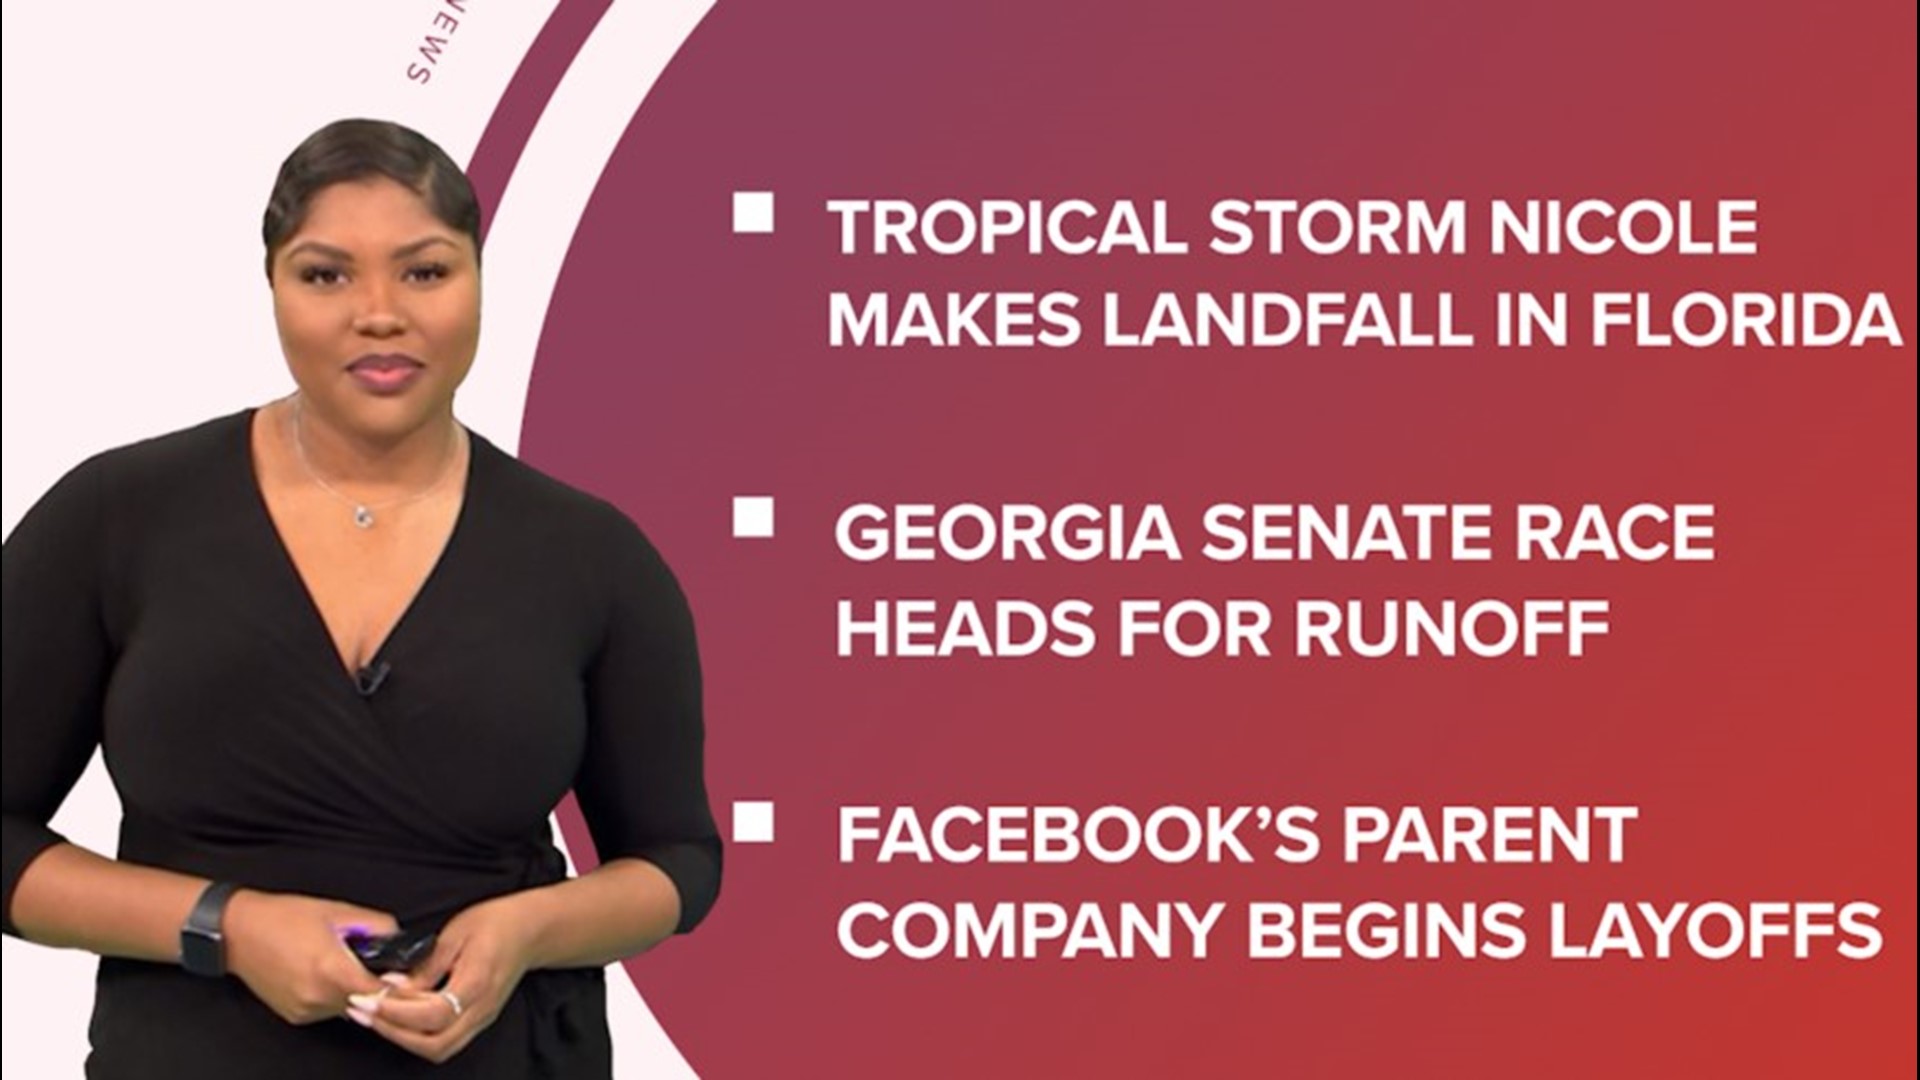 A look at what is happening in the news from Tropical Storm Nicole making landfall in Florida to Facebook Meta laying off employees and talks of a "Good Burger 2."